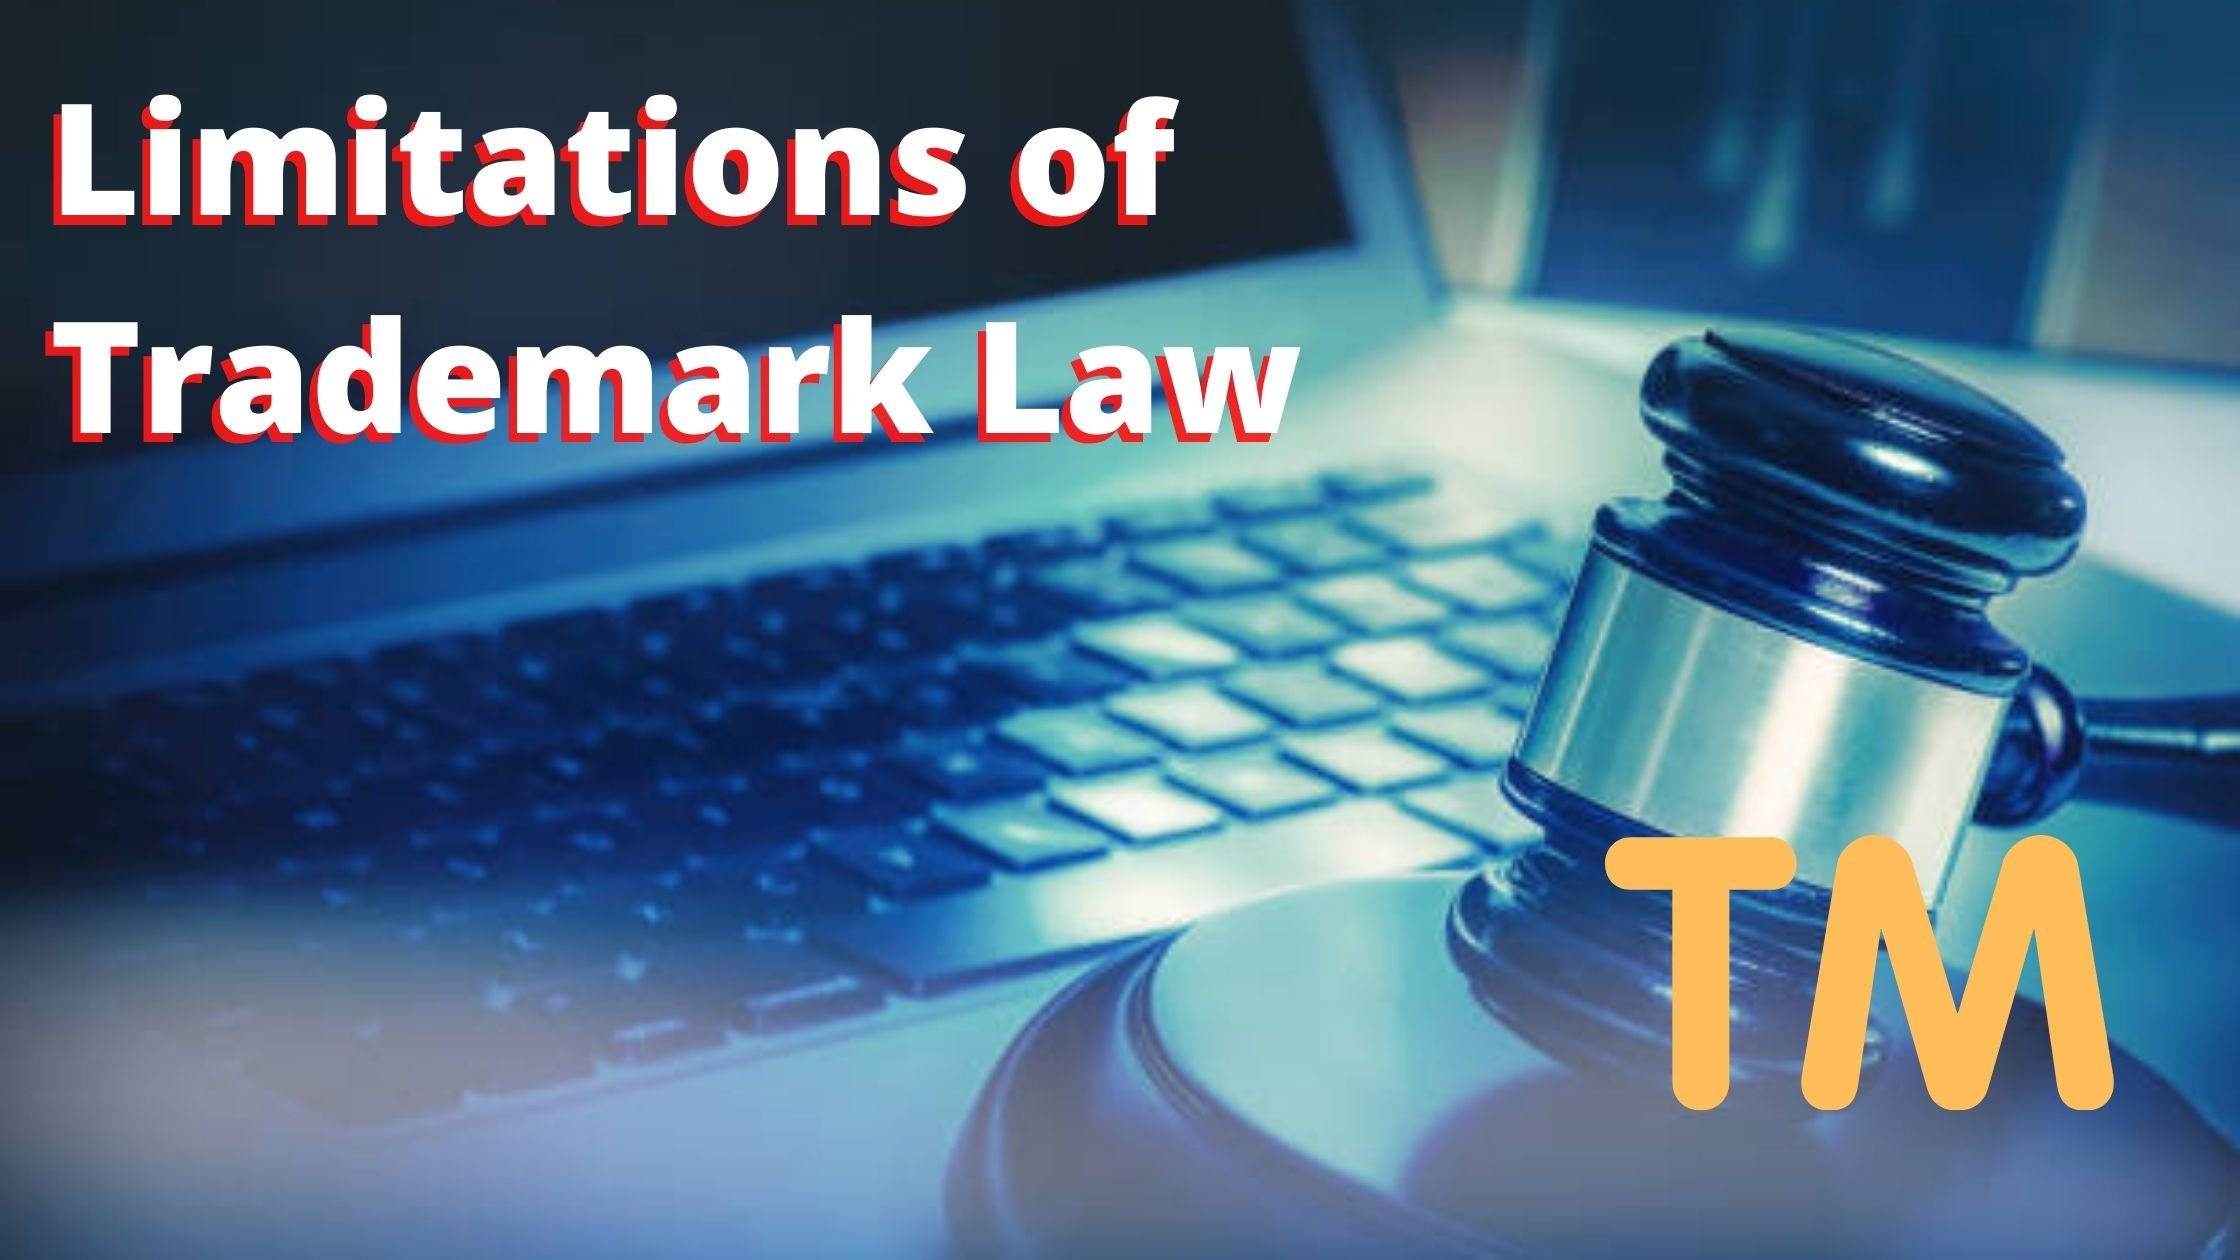 What are the Limitations of Trademark Law